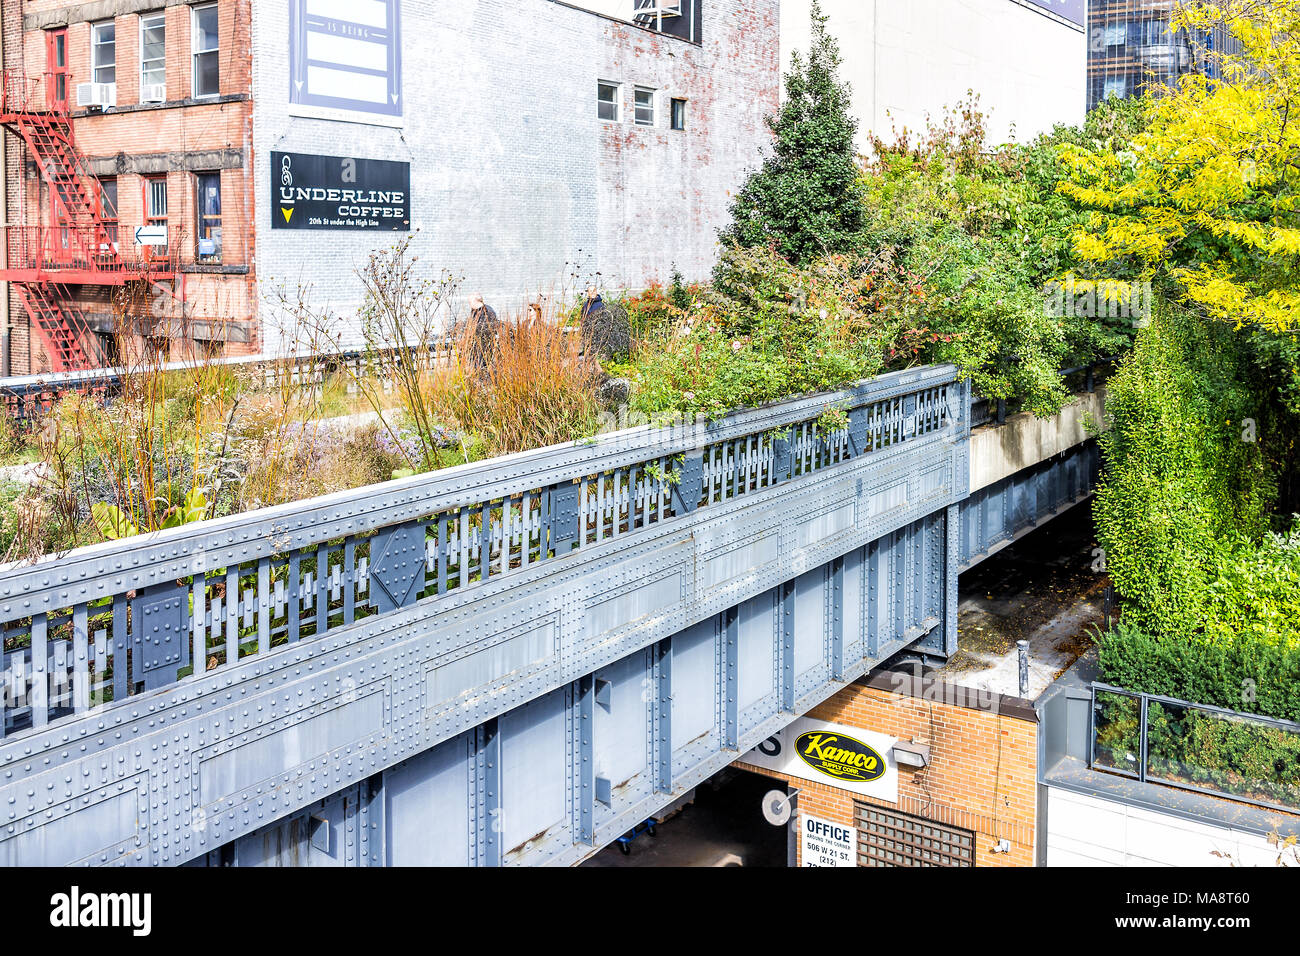 New York City, USA - October 30, 2017: Highline, high line, urban garden in NYC with Underline coffee cafe sign in Chelsea West Side by Hudson Yards,  Stock Photo